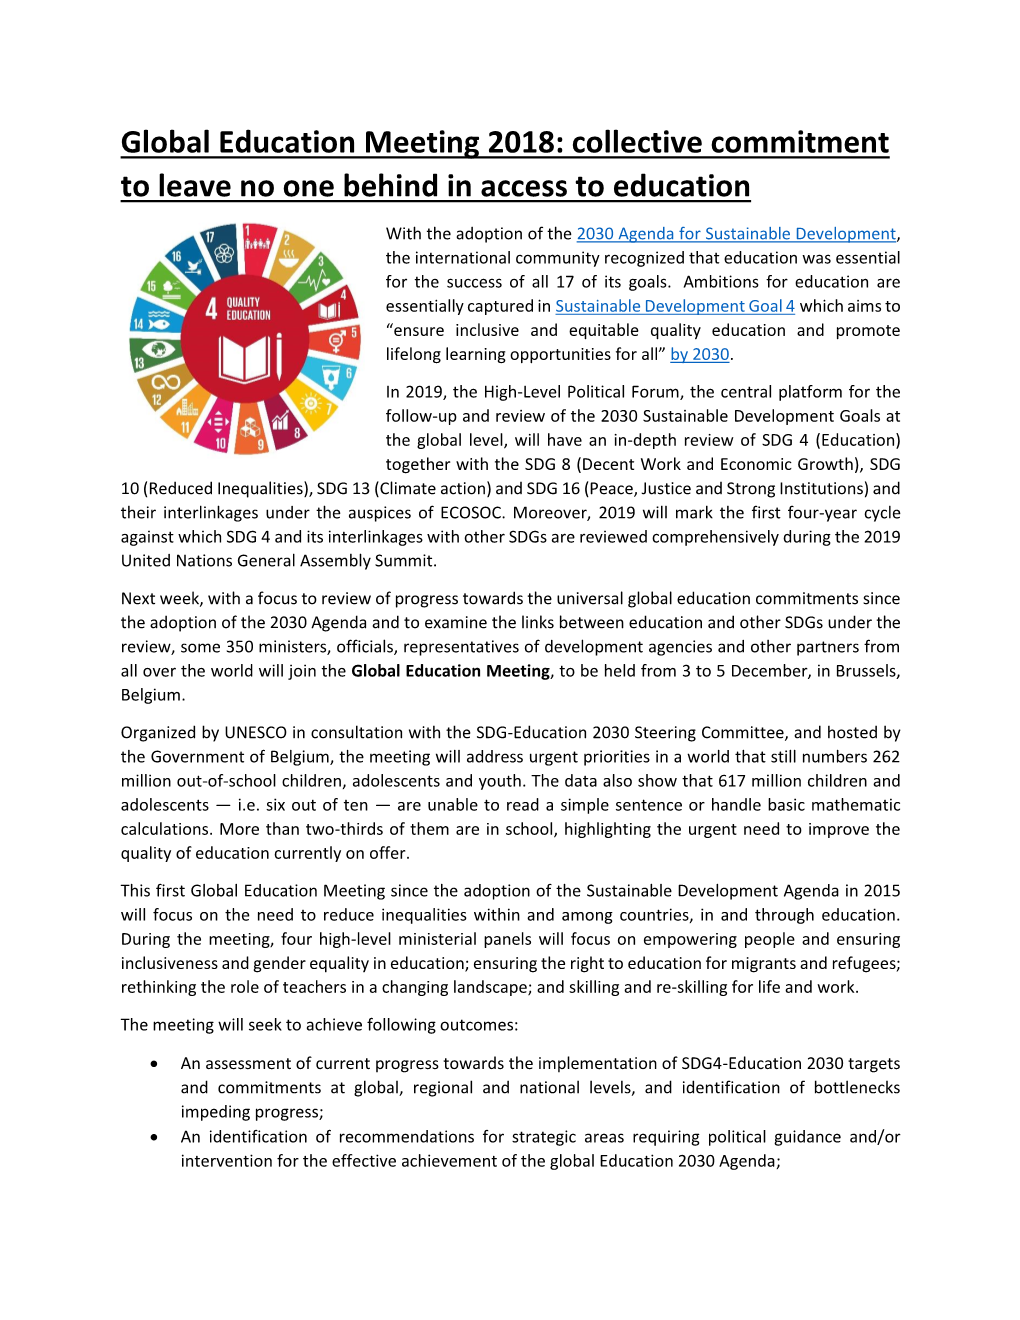 Global Education Meeting 2018: Collective Commitment to Leave No One Behind in Access to Education